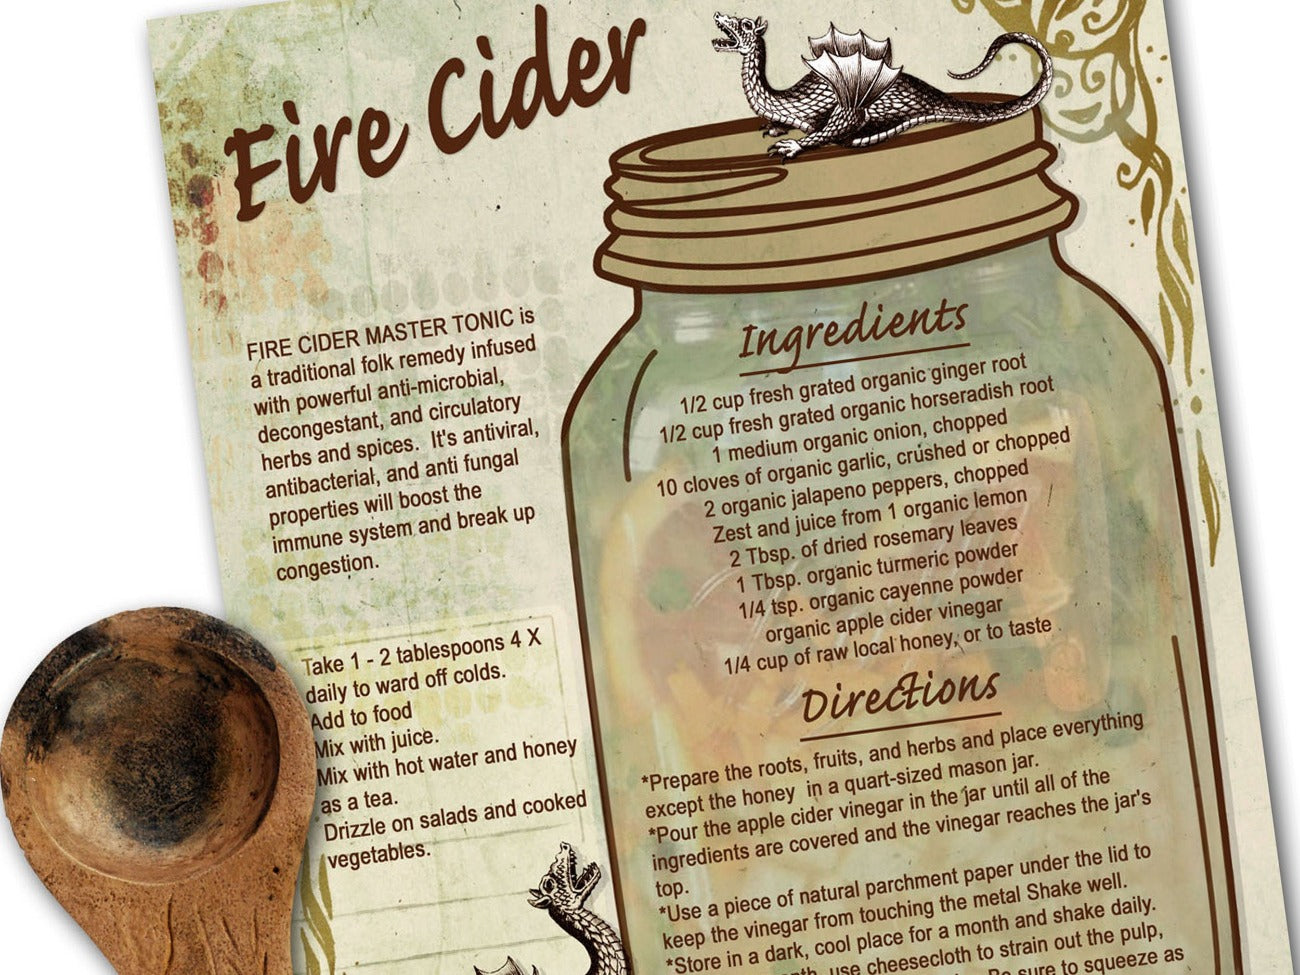 FIRE CIDER RECIPE, Master Health Tonic, Herbal Folk Remedy, Immunity Booster, Kitchen Witch Recipe, Wicca Witch Health Tonic, Witchcraft - Morgana Magick Spell